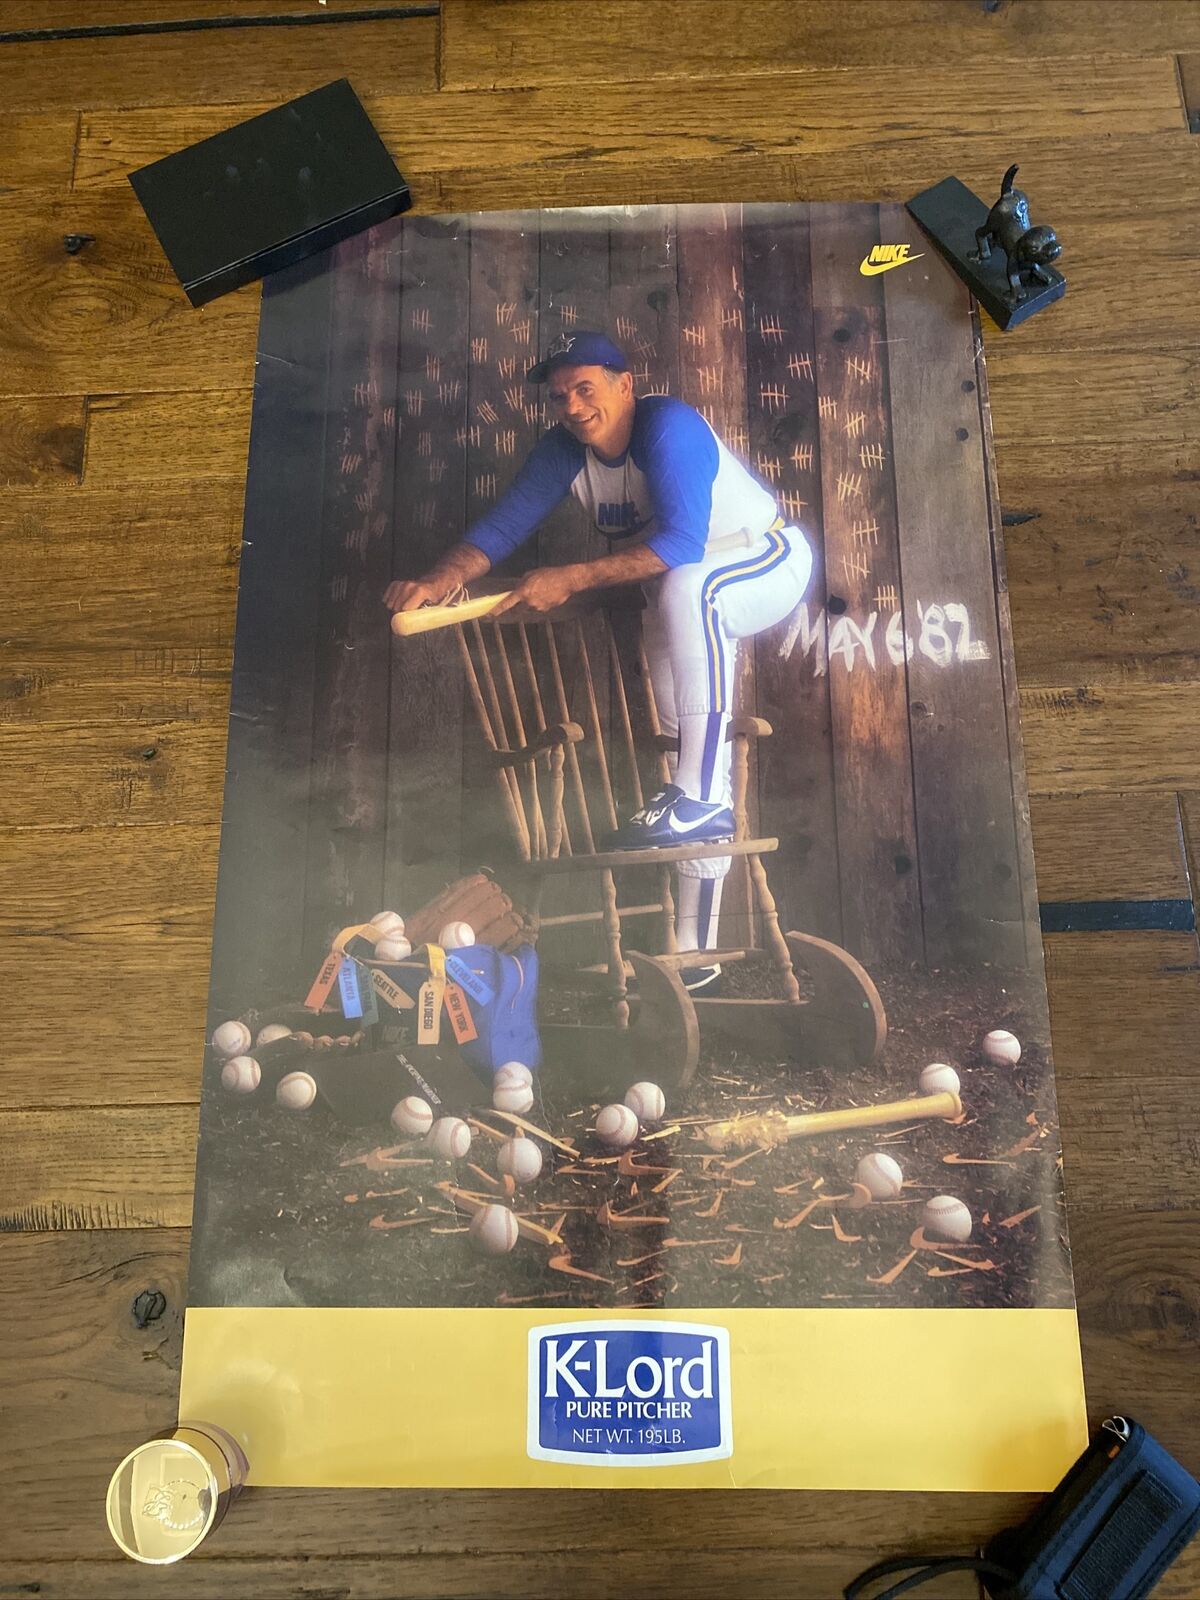 Vintage Gaylord Perry Nike Poster K-lord Pure Pitcher Mlb Mariners 22”x36” 1982